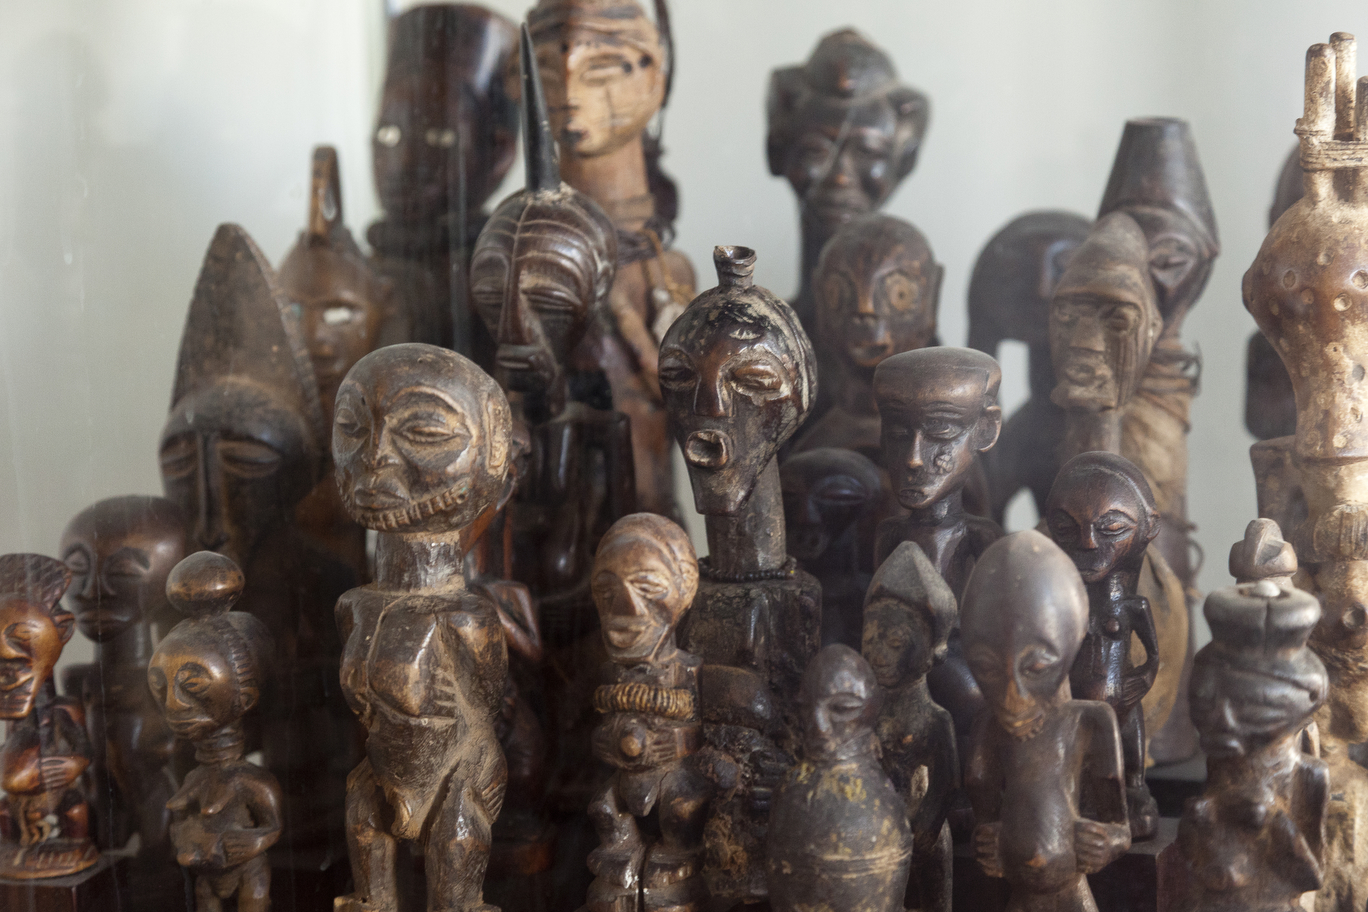 These African figures are part of Danny Simmons' personal art collection